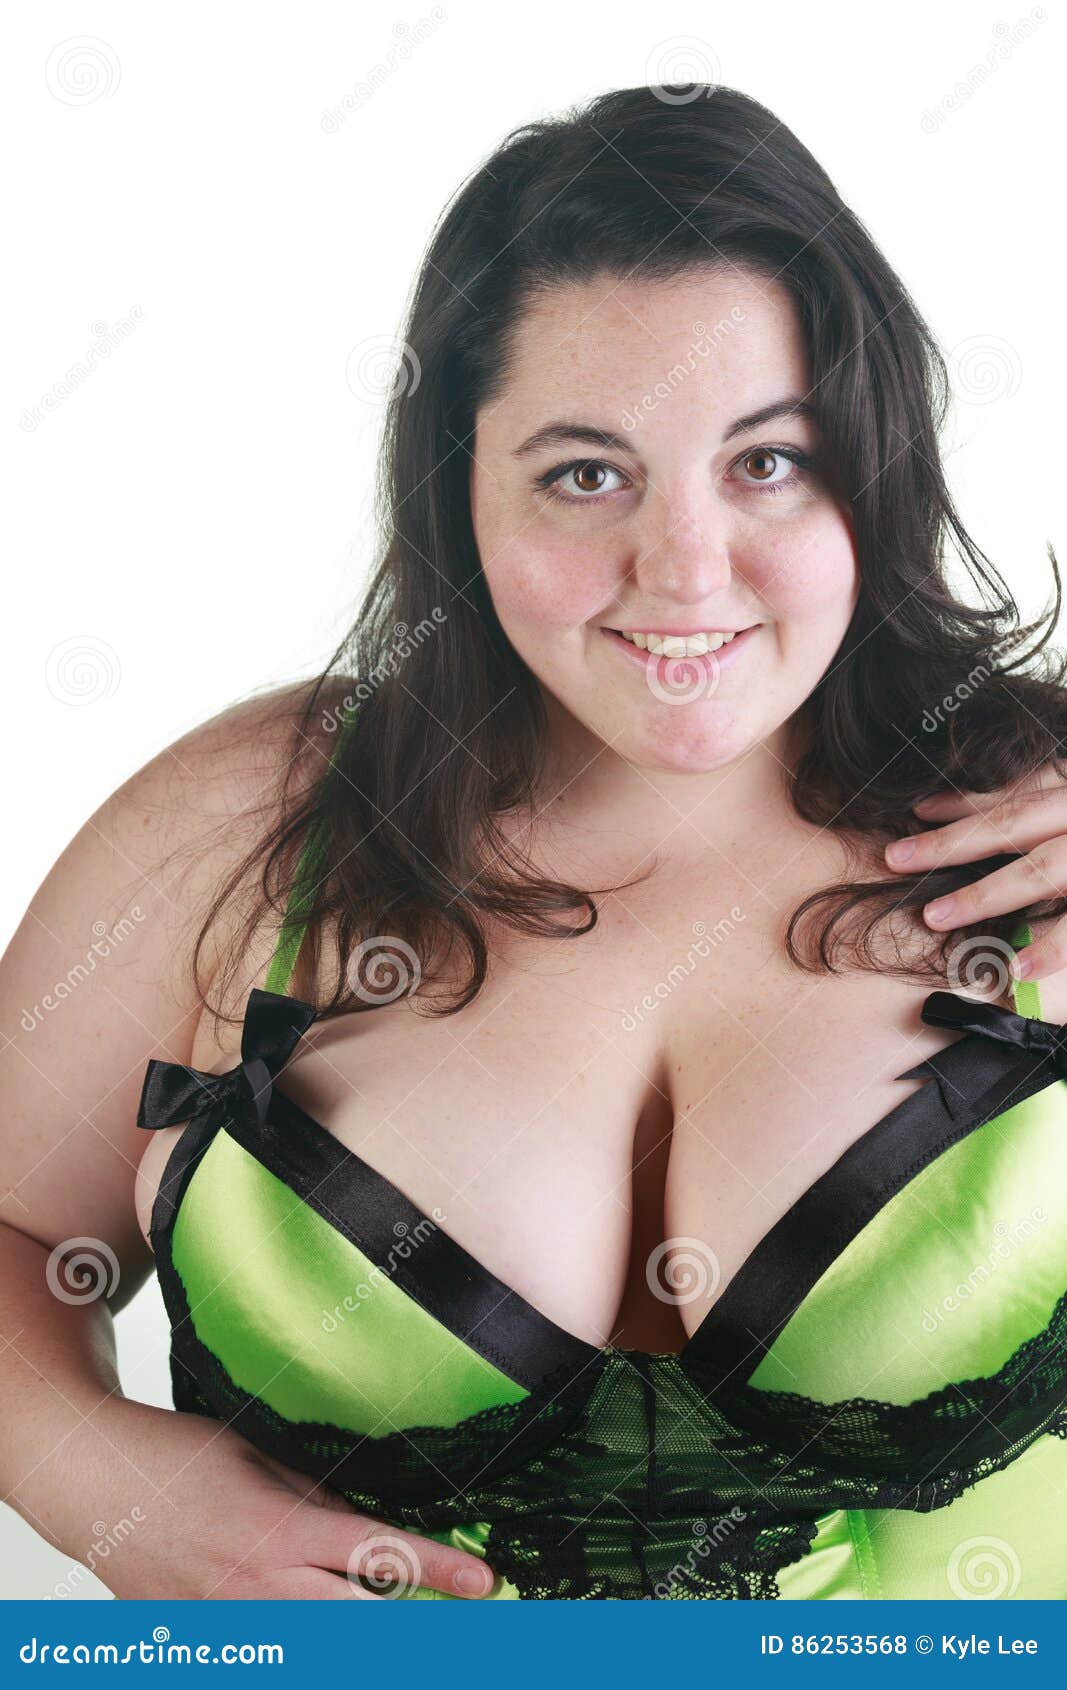 Plus Size Woman Posing in the Studio Stock Photo picture